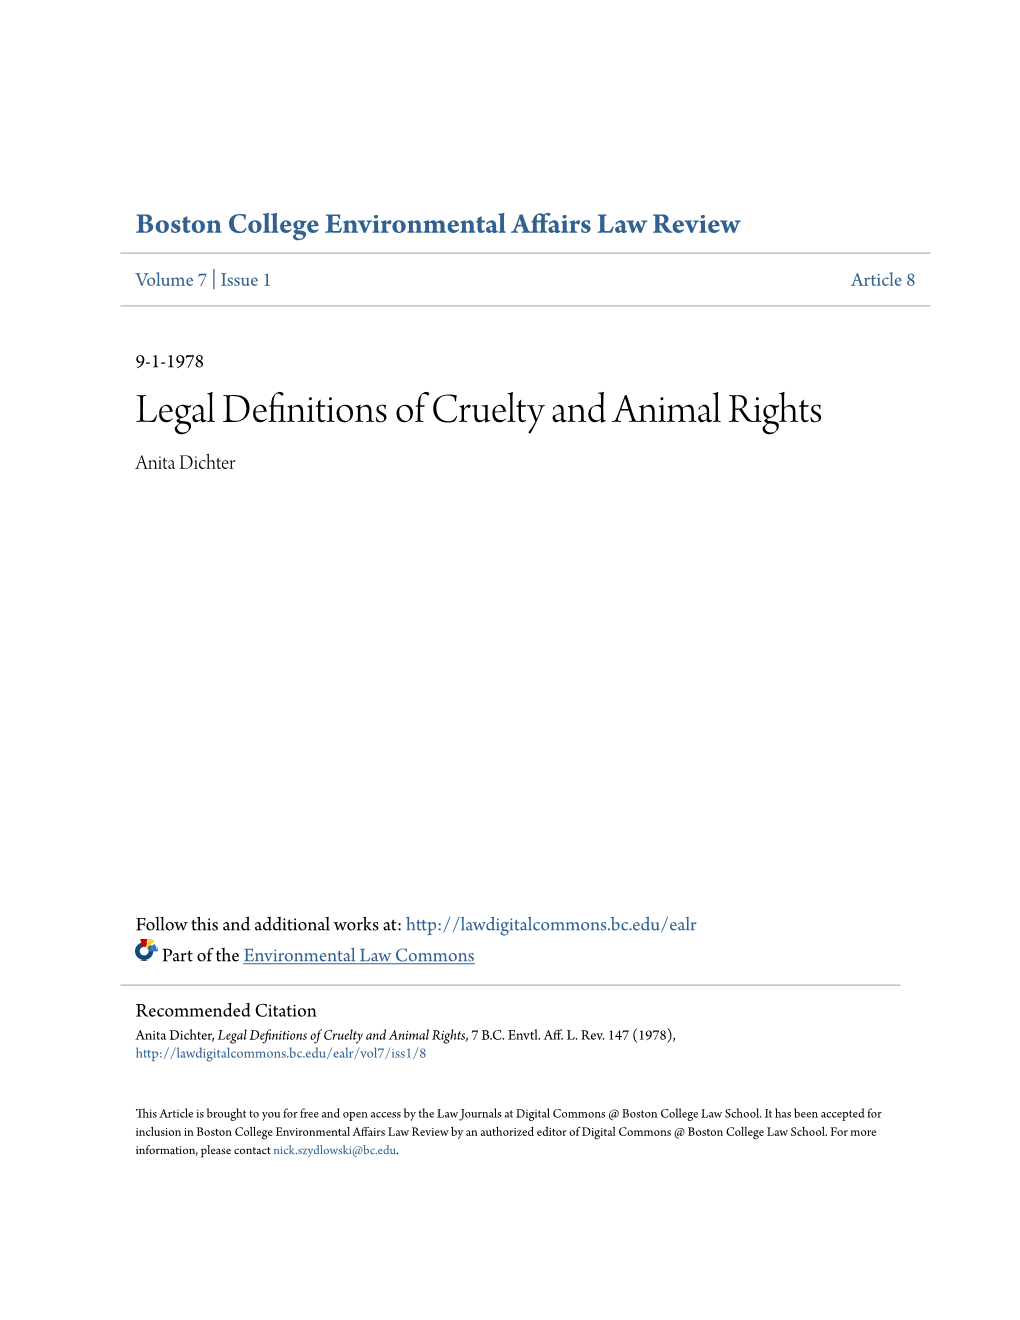 Legal Definitions of Cruelty and Animal Rights Anita Dichter